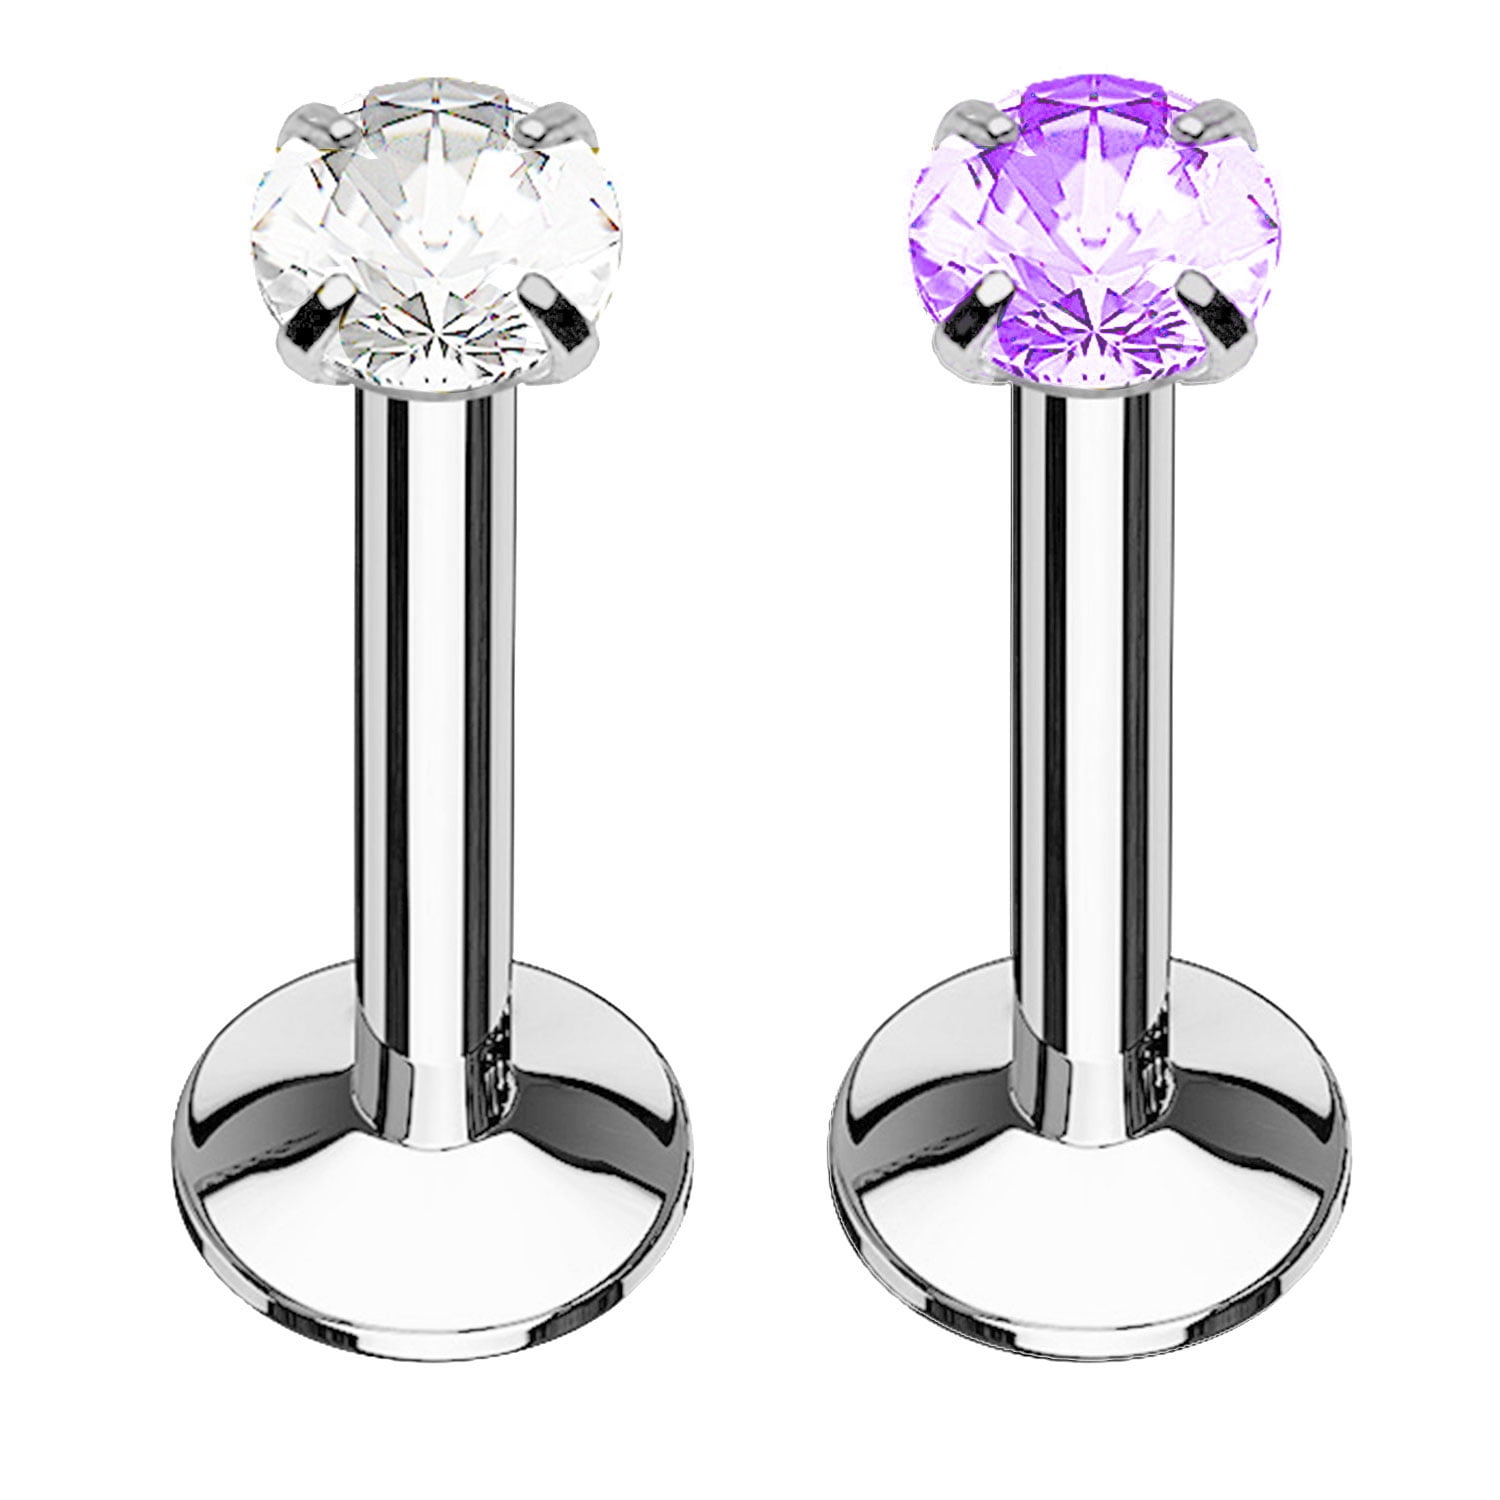 2pcs16G Stainless Steel Cubic Zirconia Bar Labret Lip Tongue Rings Piercing Stud